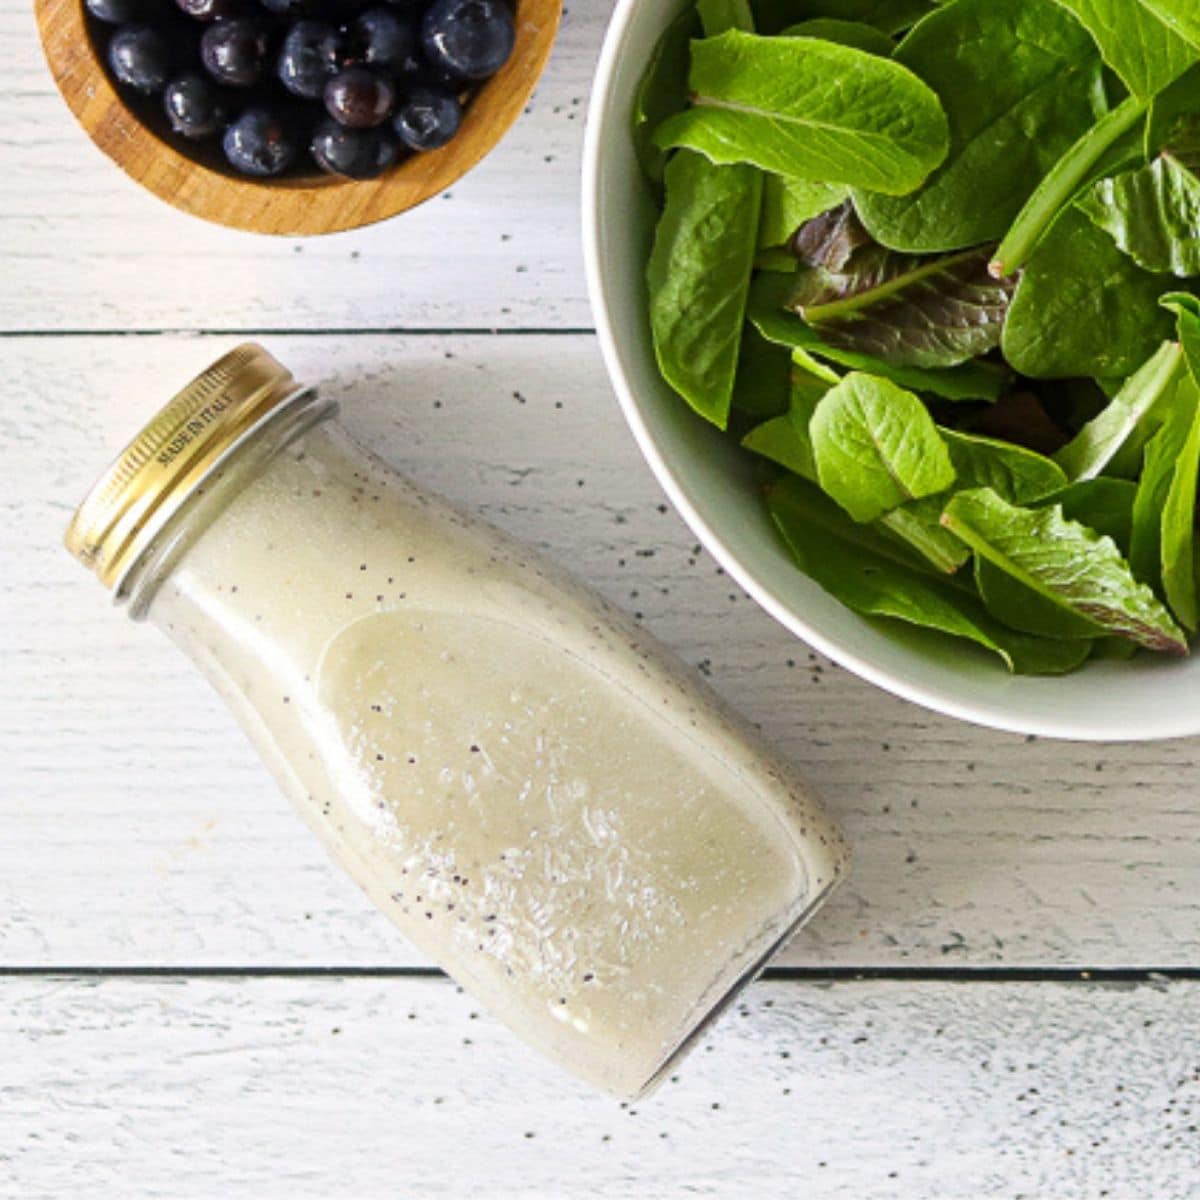 sugar free poppyseed dressing in a glass jar next to a bowl of lettuce